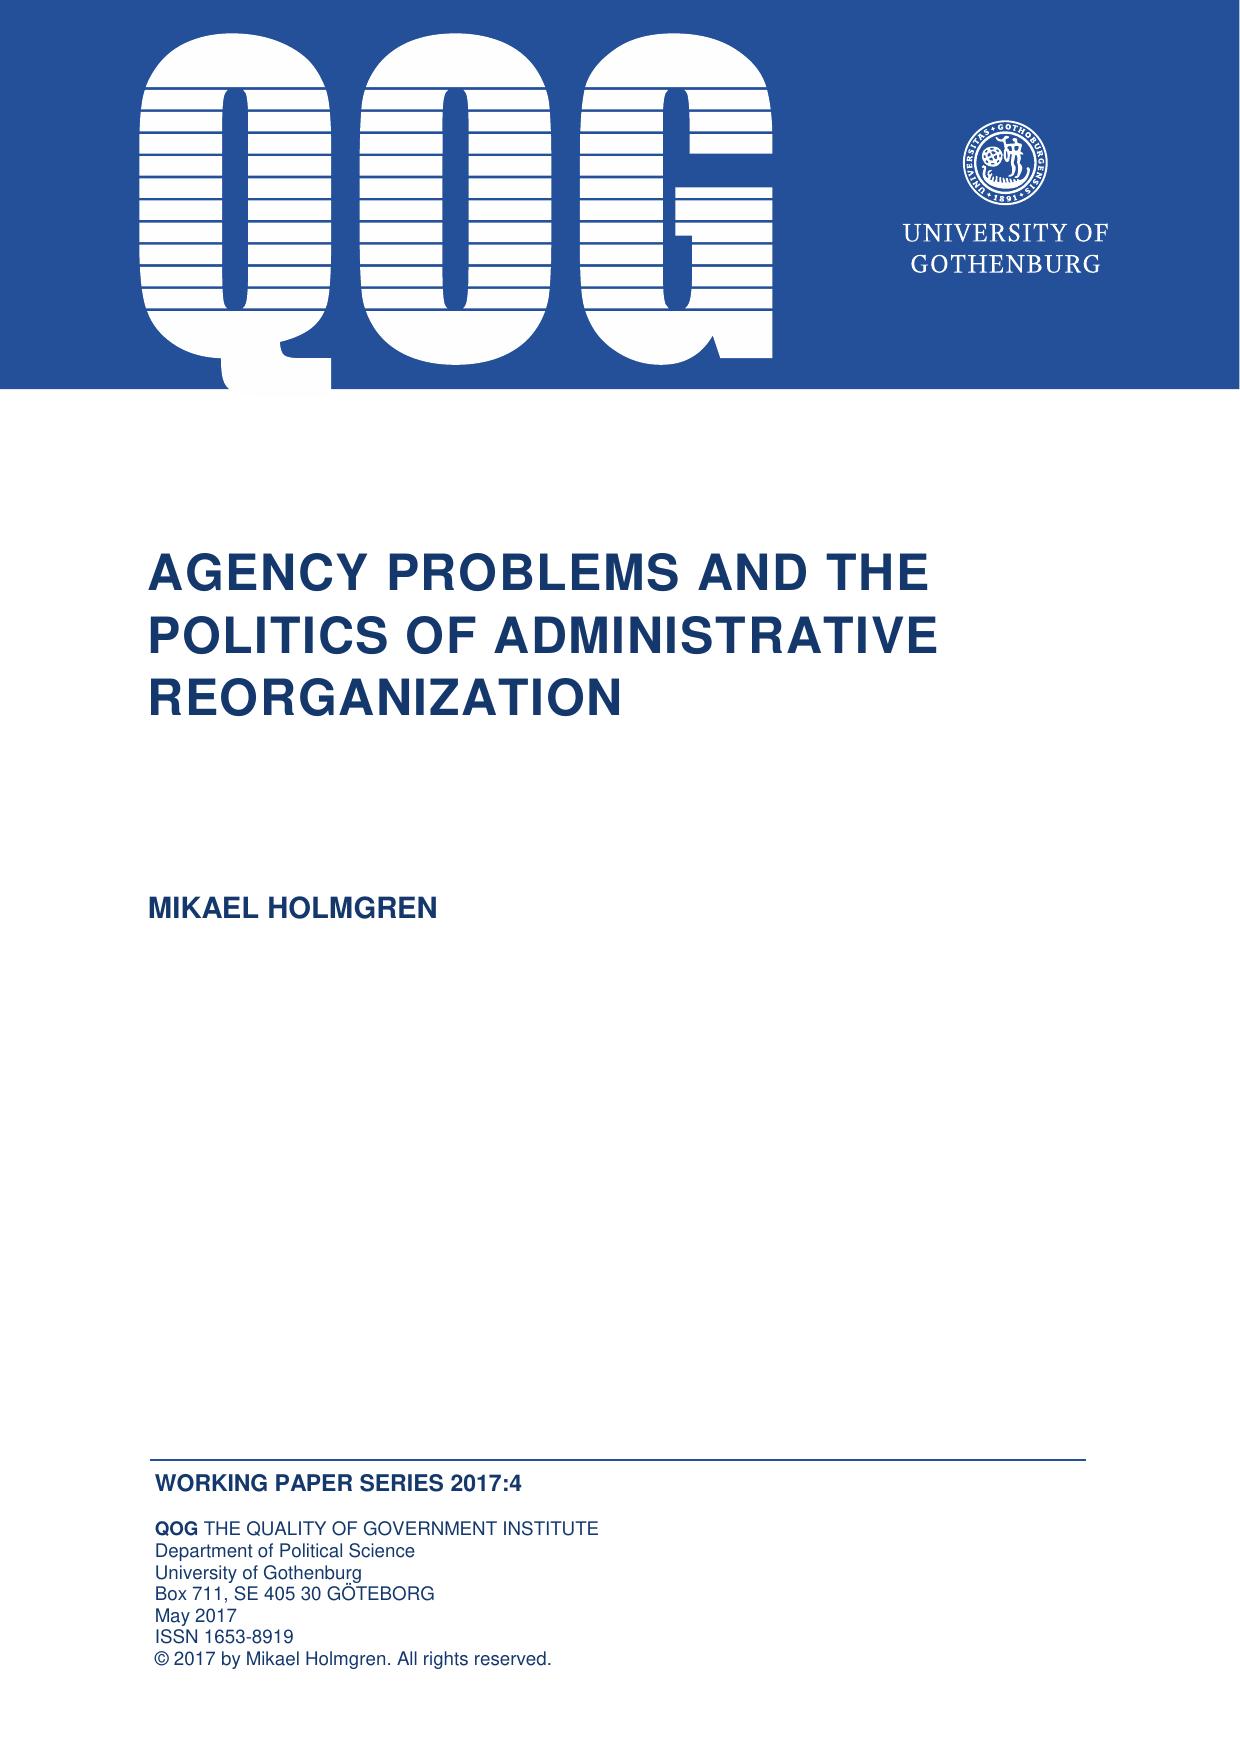 Agency problems and the politics of administrative reorganization,2017 PDF